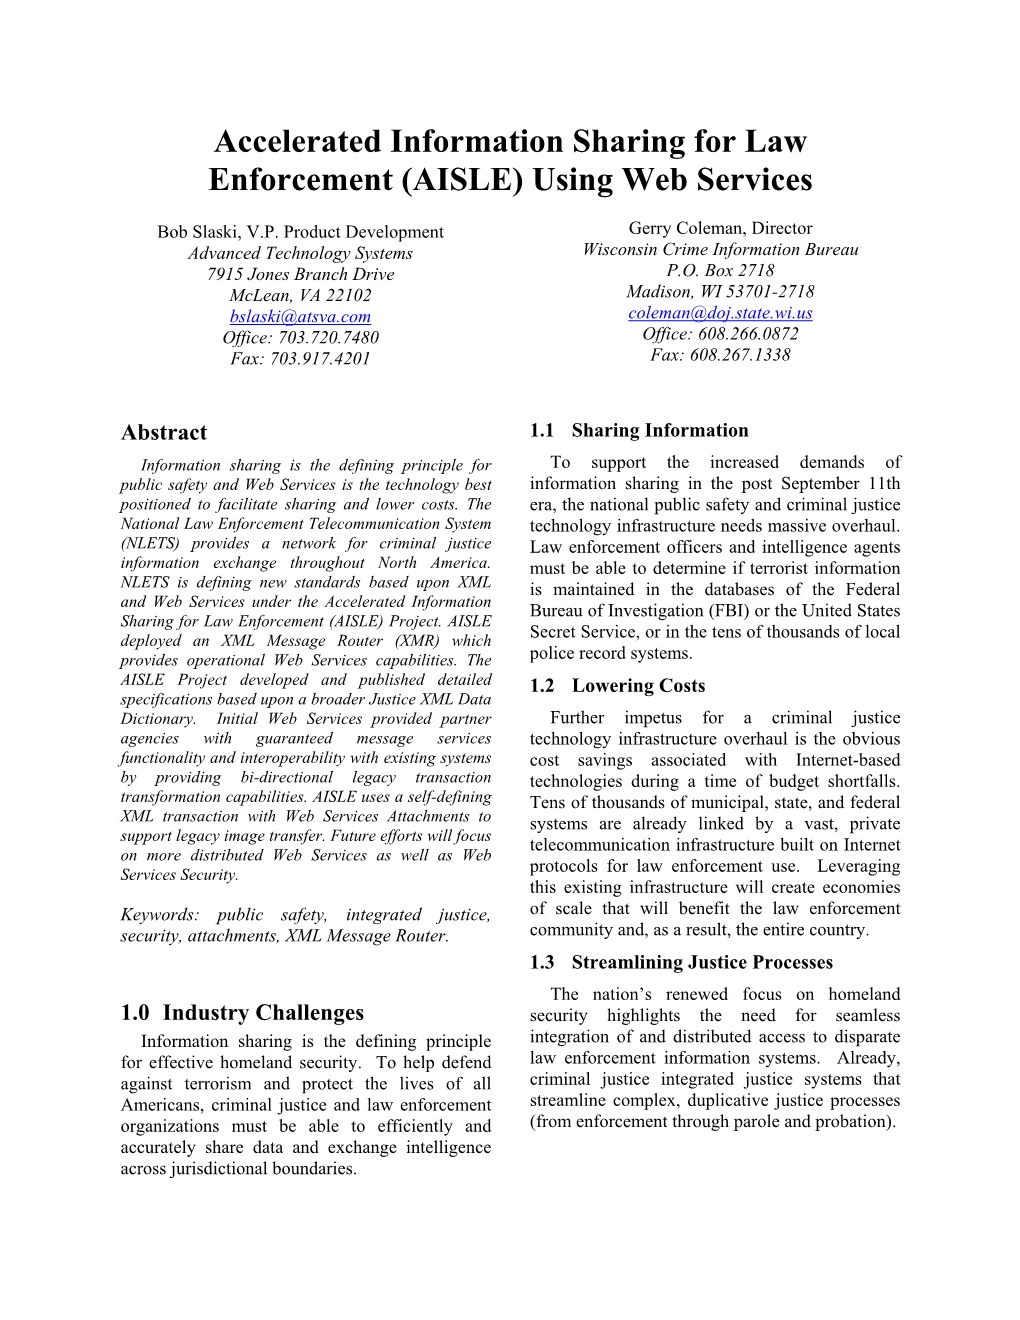 Accelerated Information Sharing for Law Enforcement (AISLE) Using Web Services